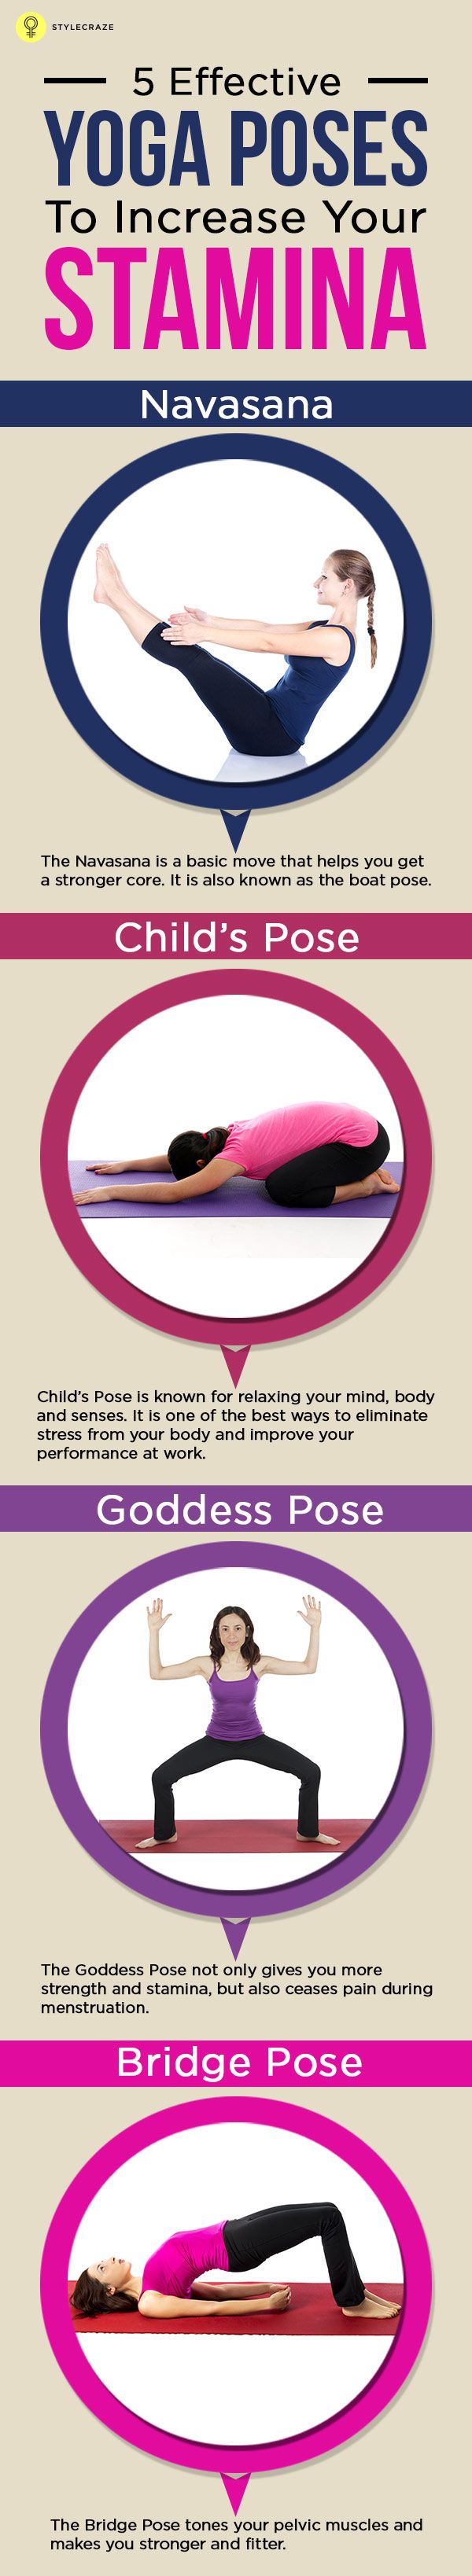 5 Effective Yoga Poses To Increase Your Stamina